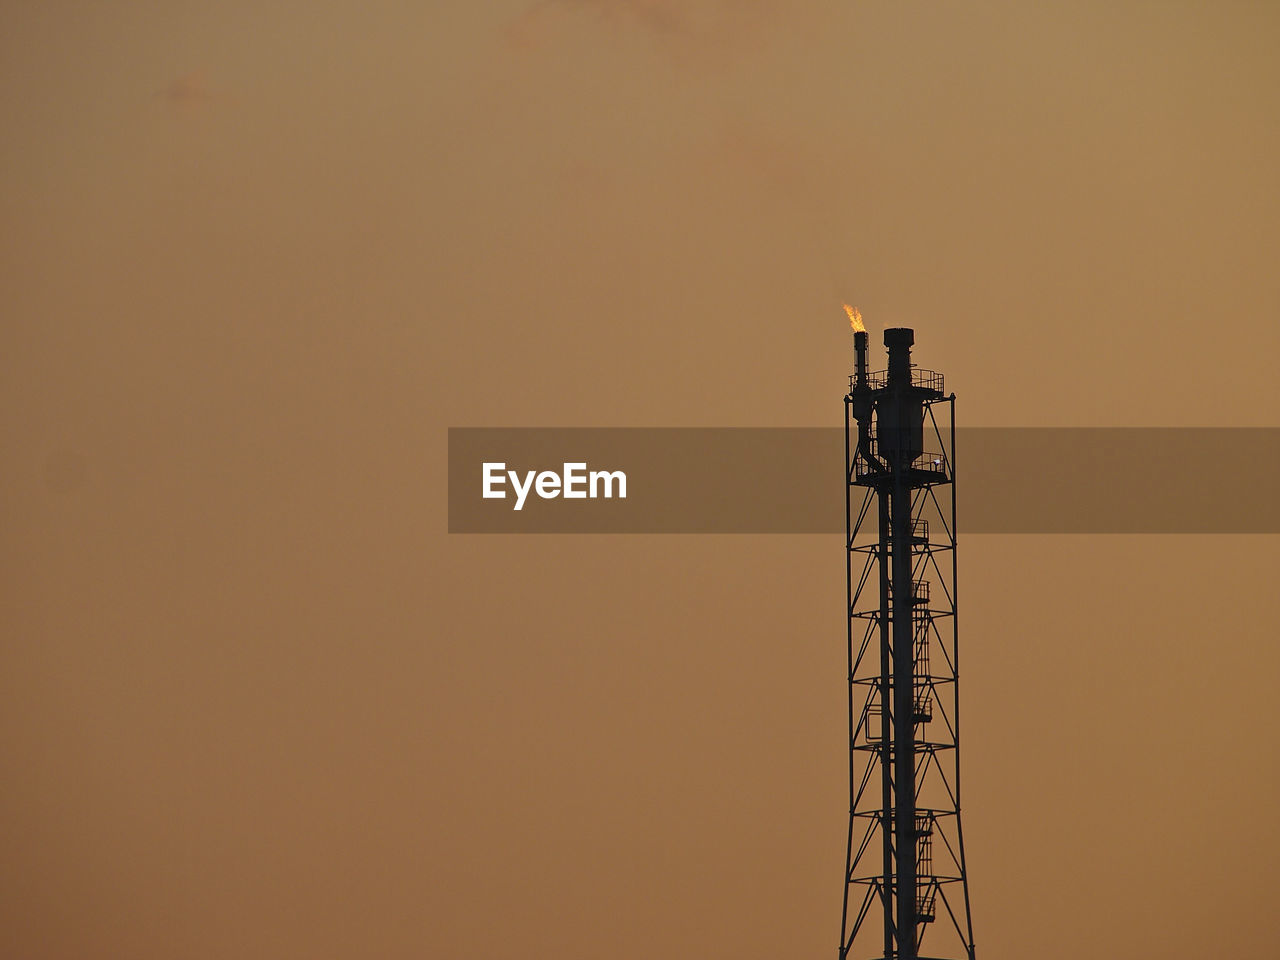 High tower of refinery in evening sky background